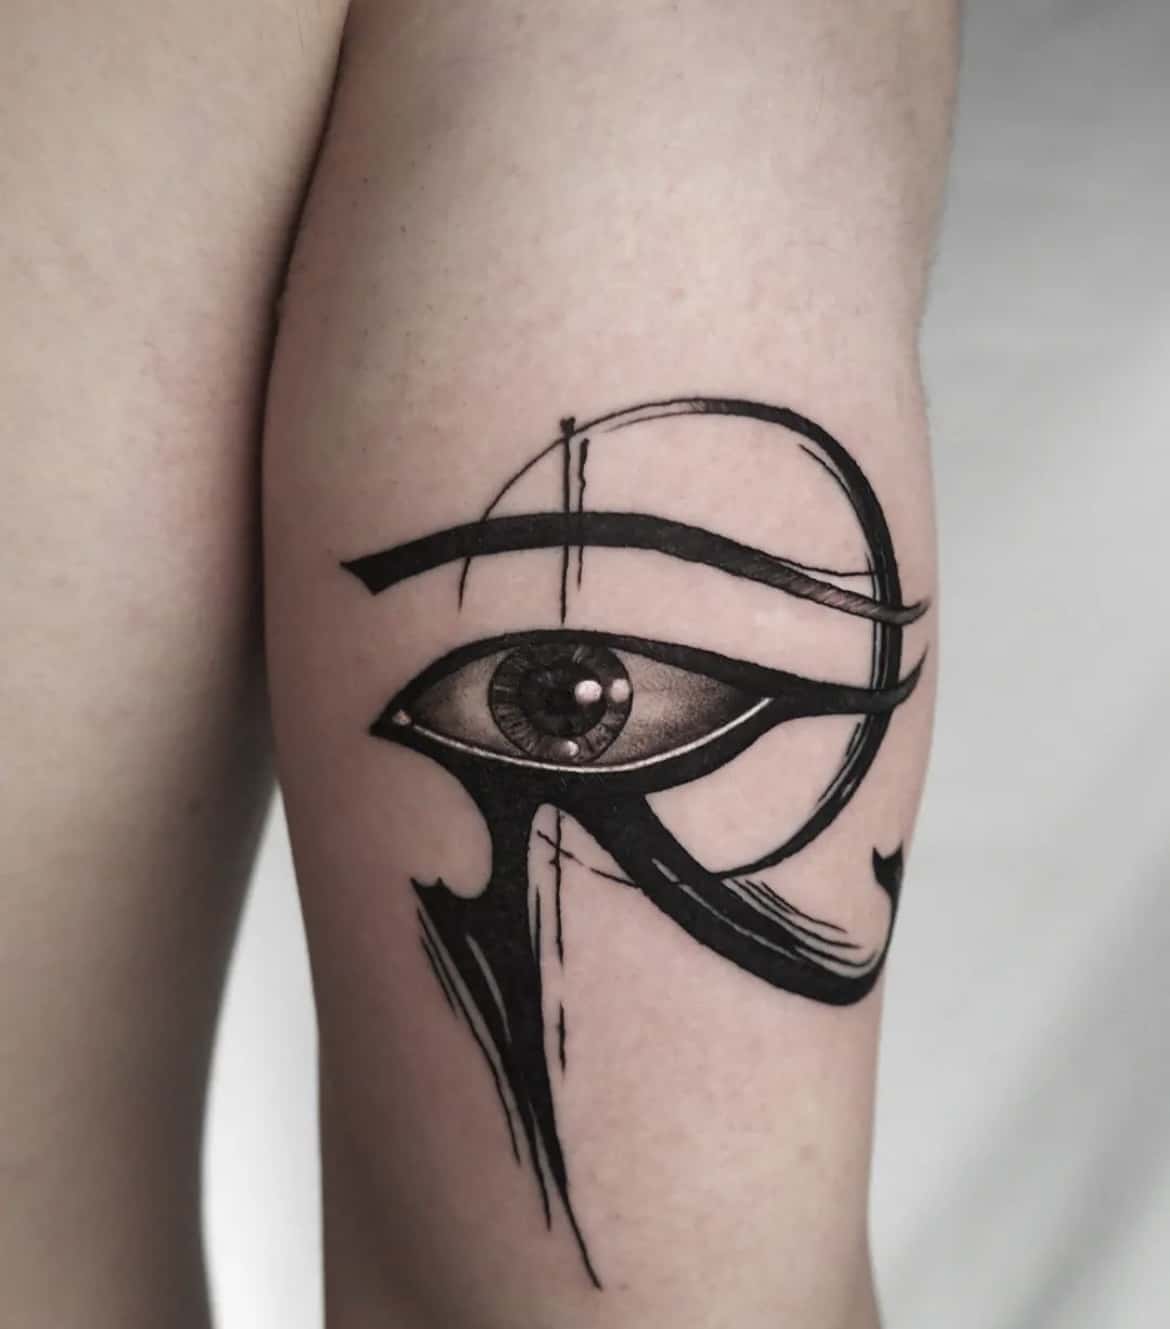 Eye of Horus Tattoo Meaning: Exploring Tattoo Meanings and Their Cultural Significance